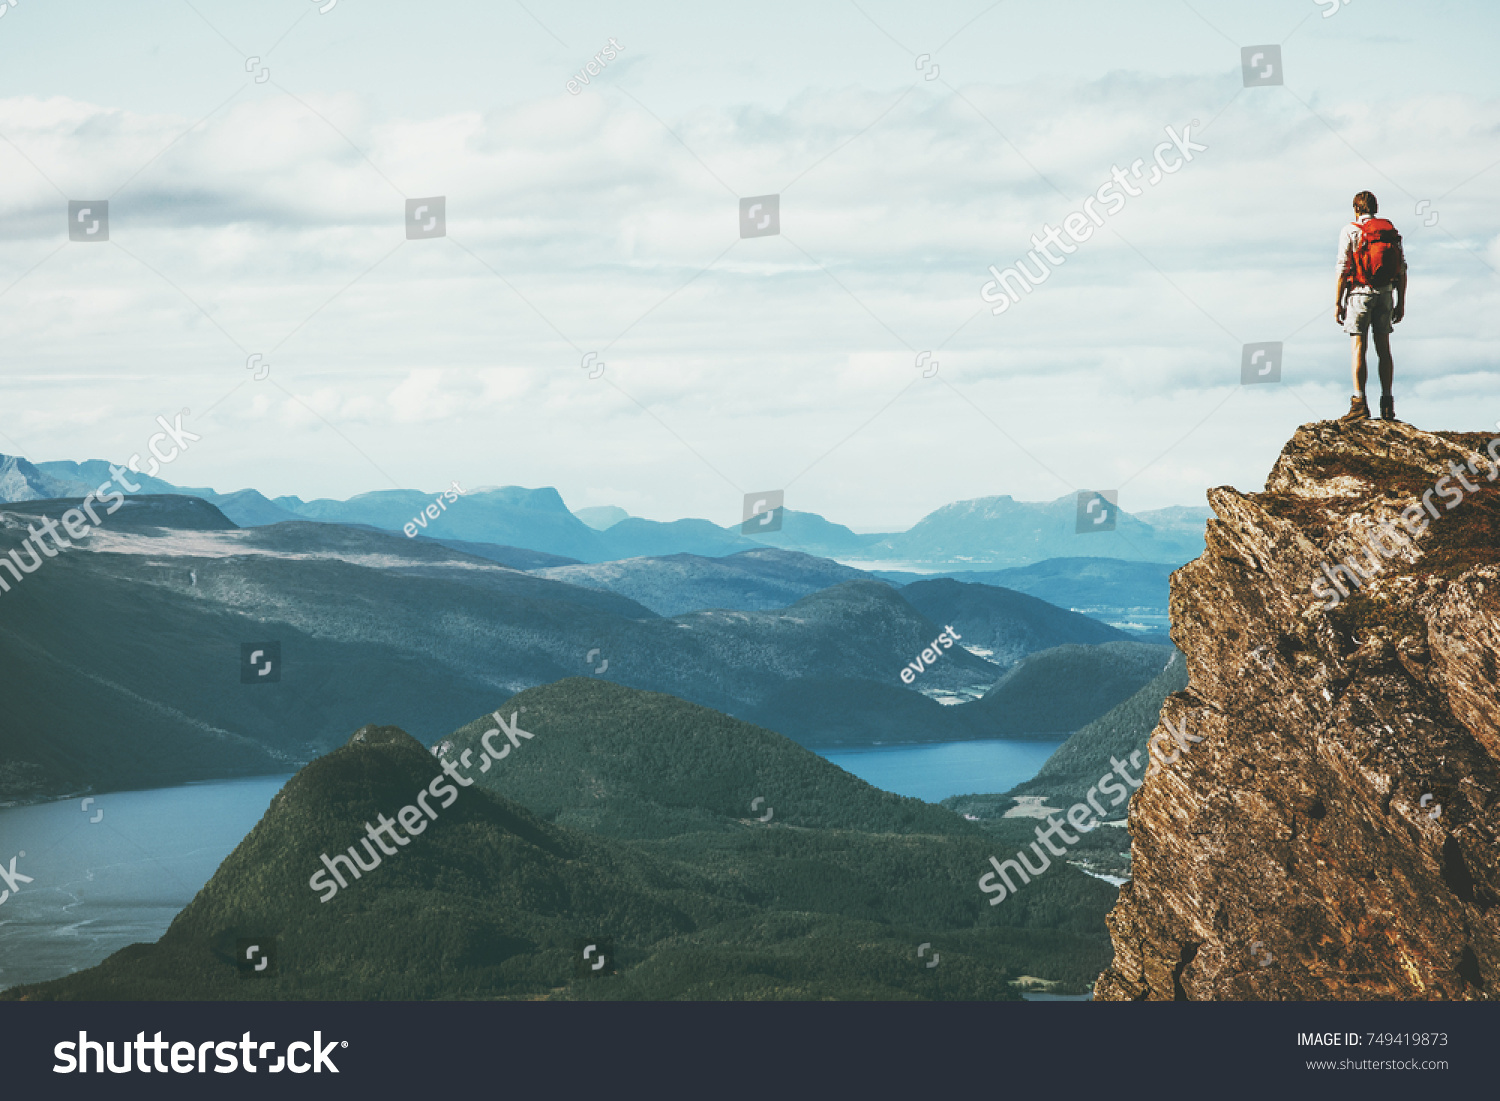 Life on the edge Traveler on cliff mountains over fjord enjoying Norway landscape Travel Lifestyle success motivation concept adventure active vacations outdoor #749419873